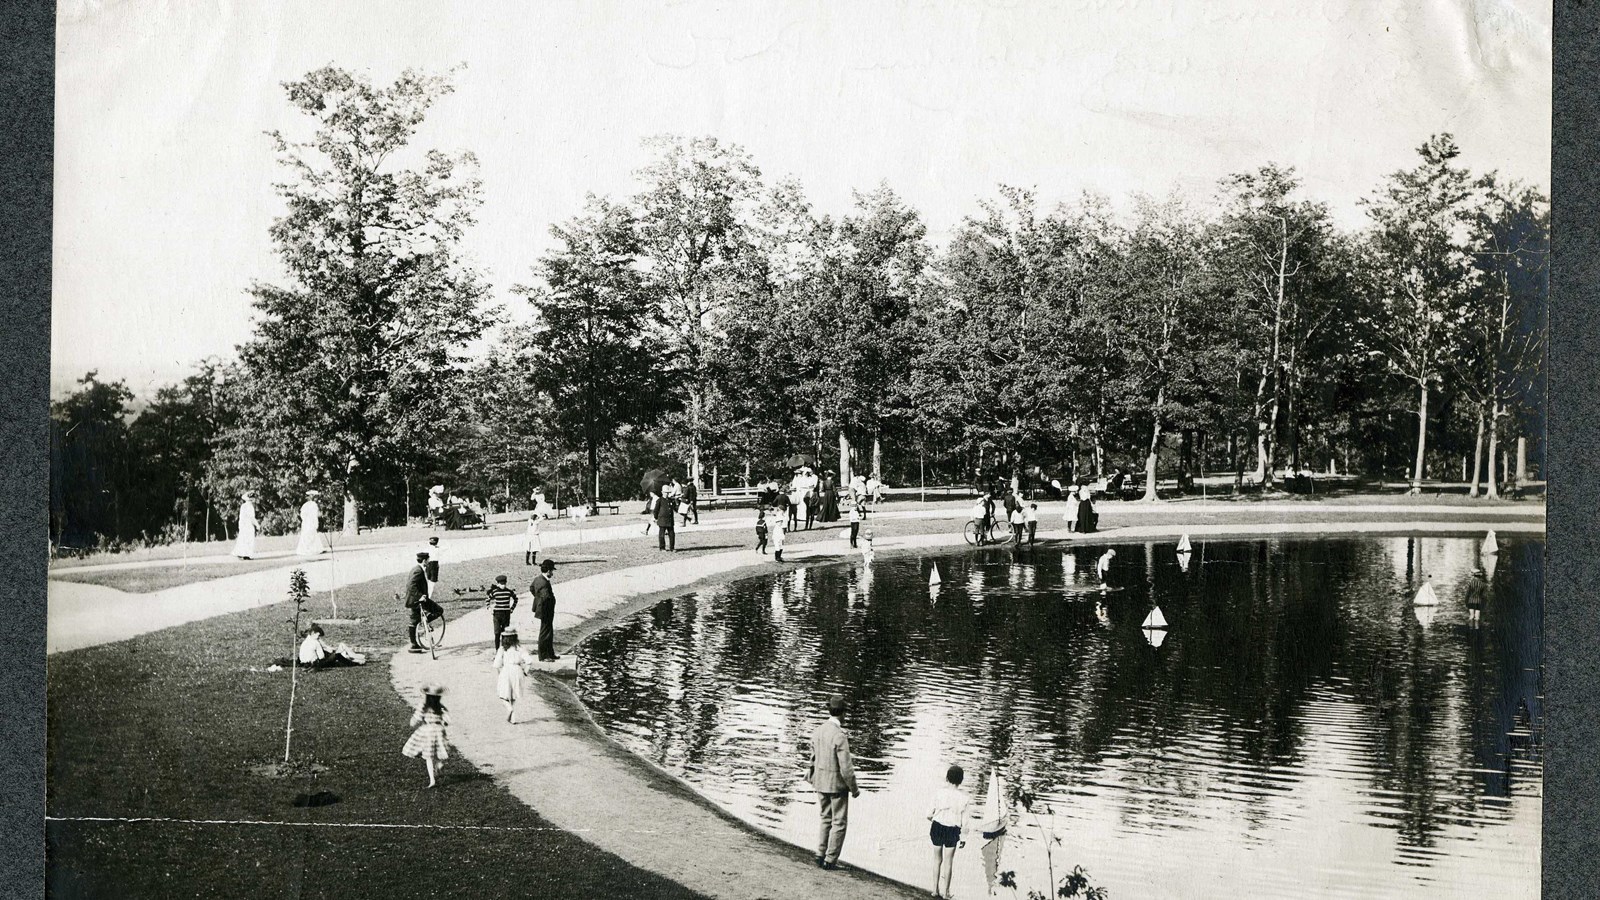 Black and white of water with people walking around, mini boats in it, paths and trees on edge